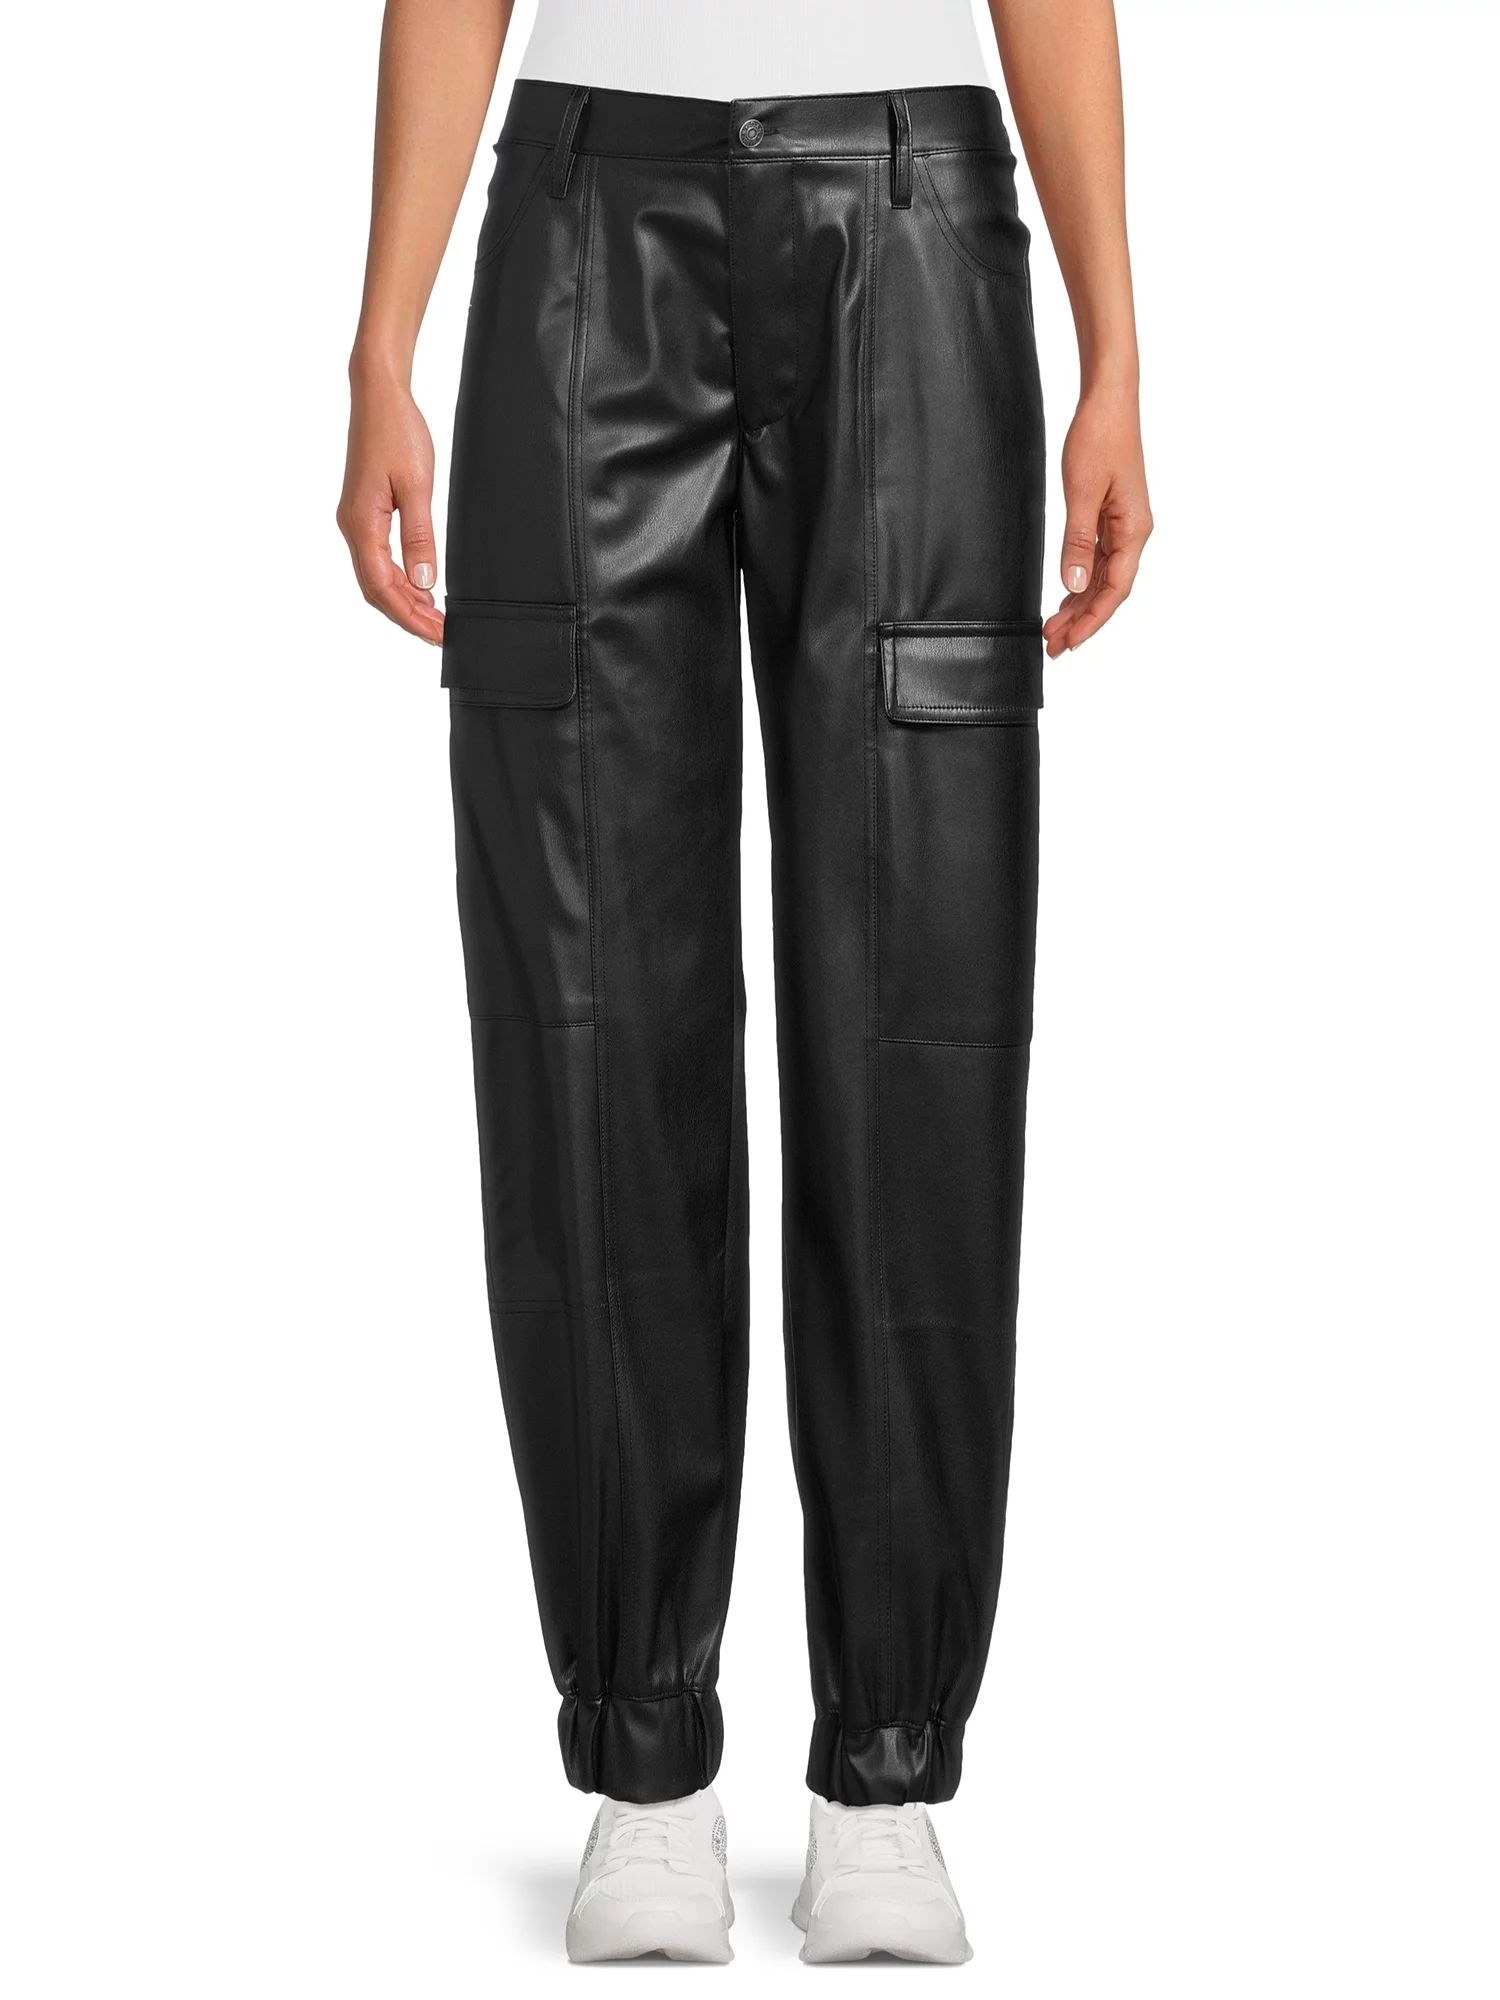 Madden NYC Juniors Faux Leather Jogger Pants, 28" Inseam, Sizes XS-3XL | Walmart (US)